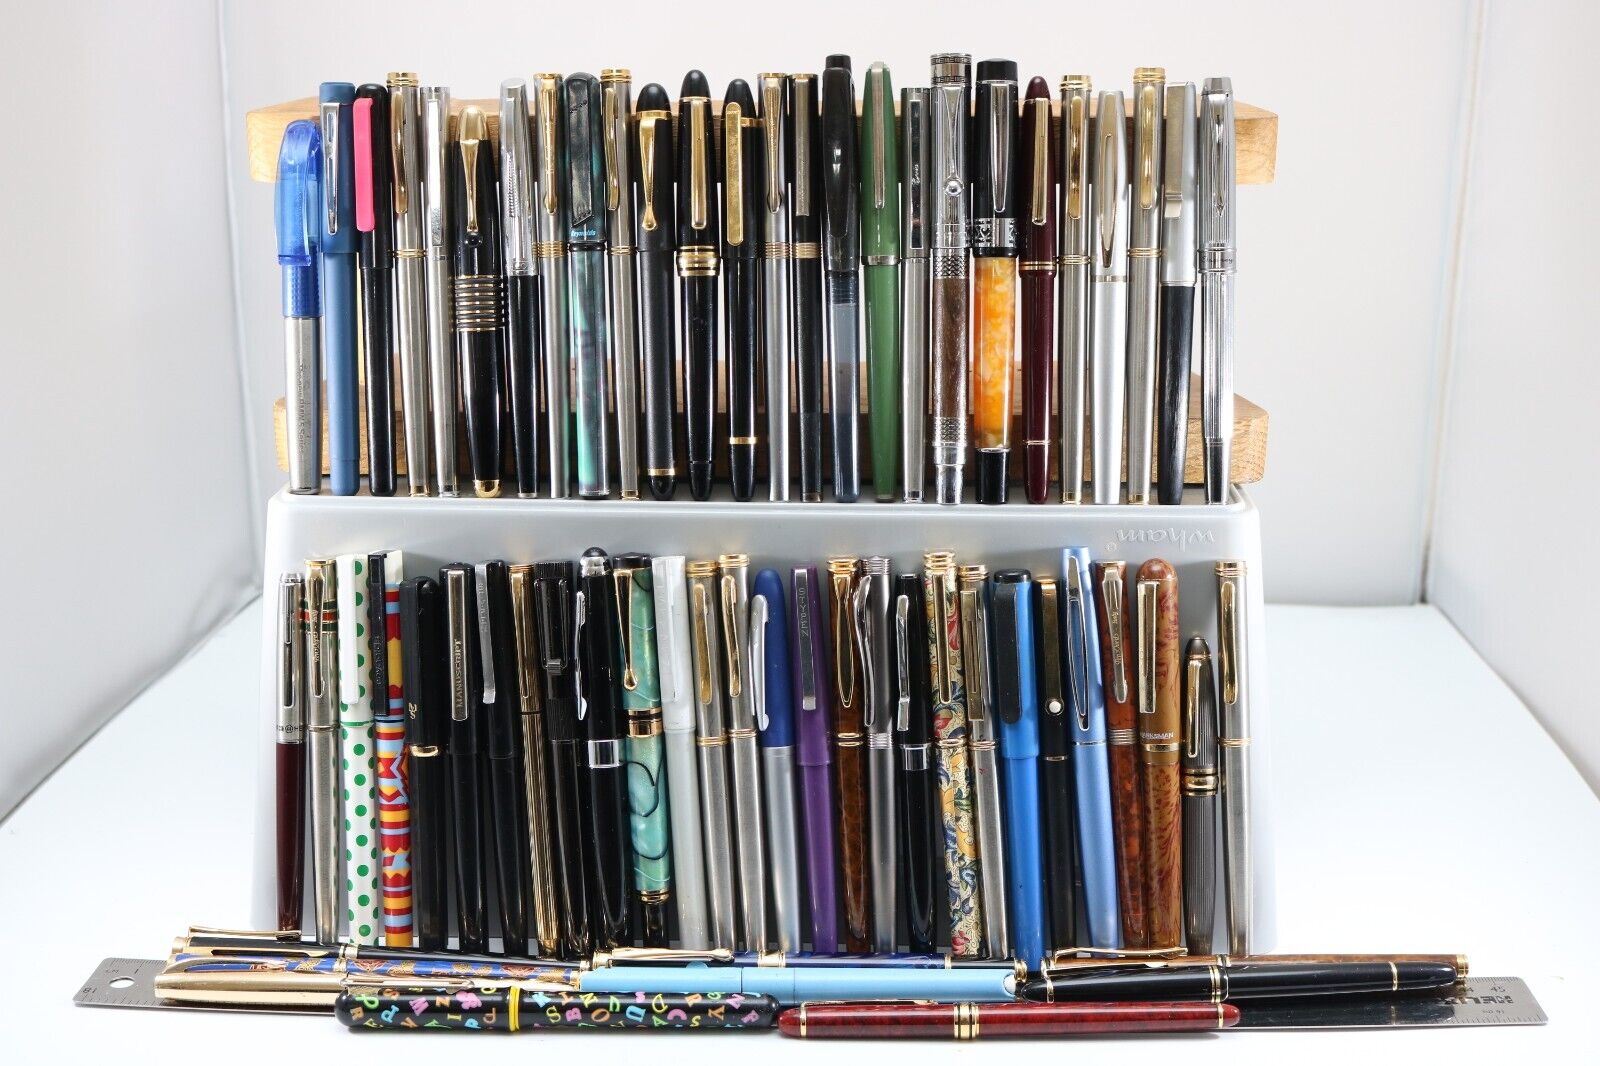 Vintage Job Lot of 60 Fountain Pens (All Complete With Nibs)